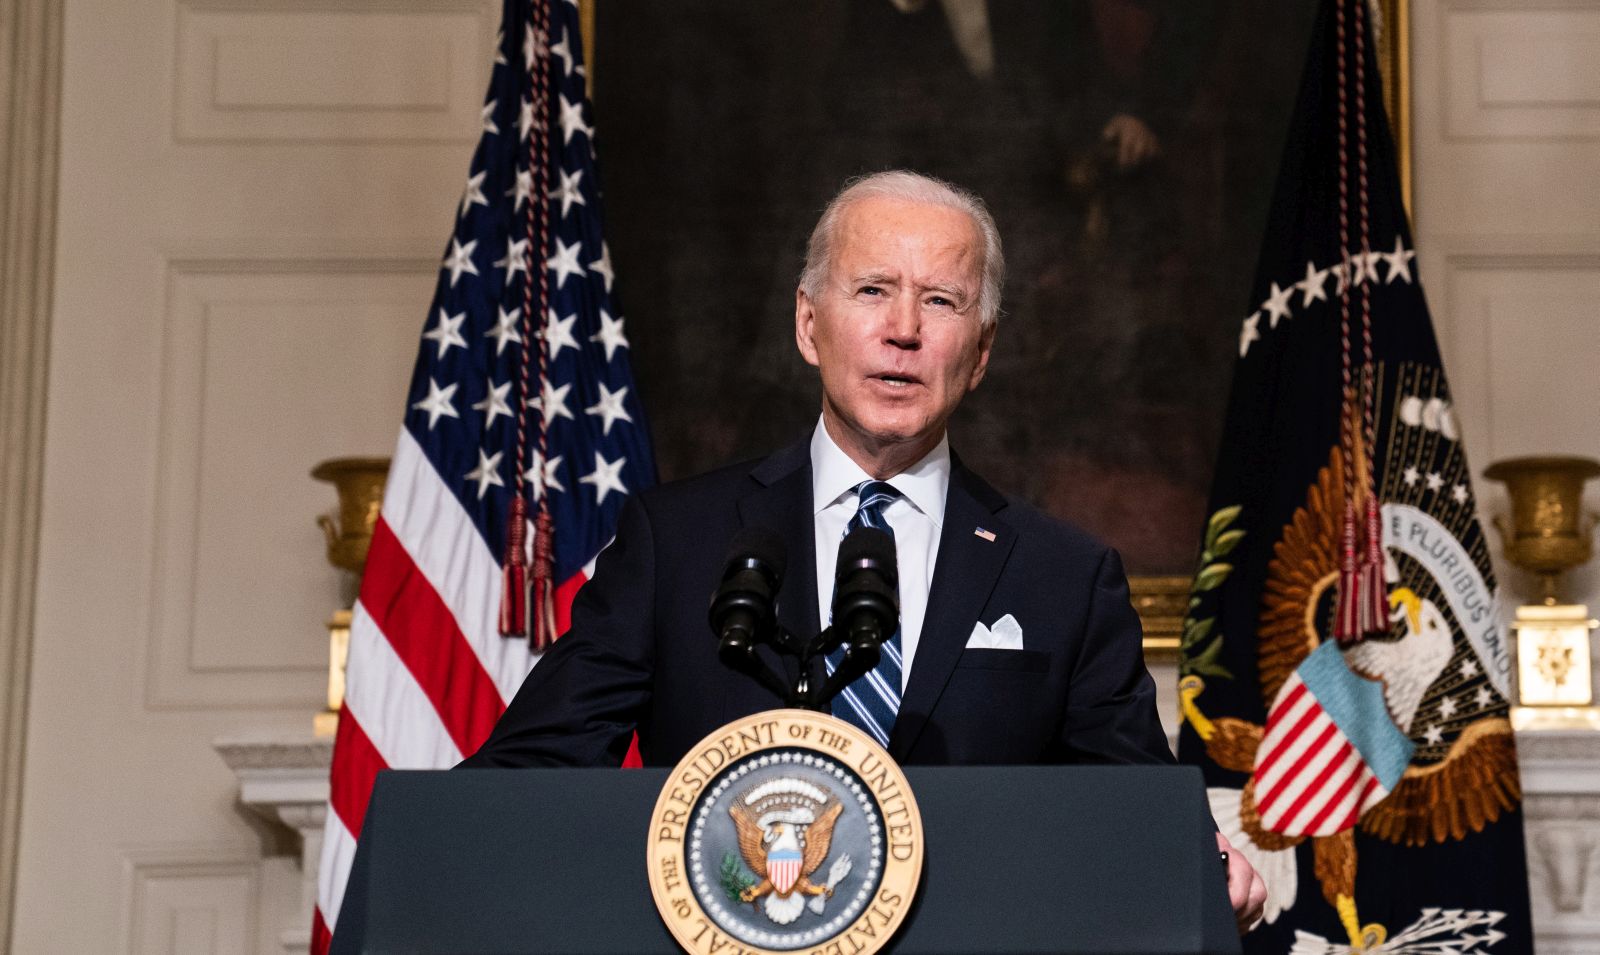 epa08969468 US President Joe Biden delivers remarks on his administration’s response to climate change at an event in the State Dining Room of the White House in Washington, DC, USA, 27 January 2021.  EPA/Anna Moneymaker / POOL